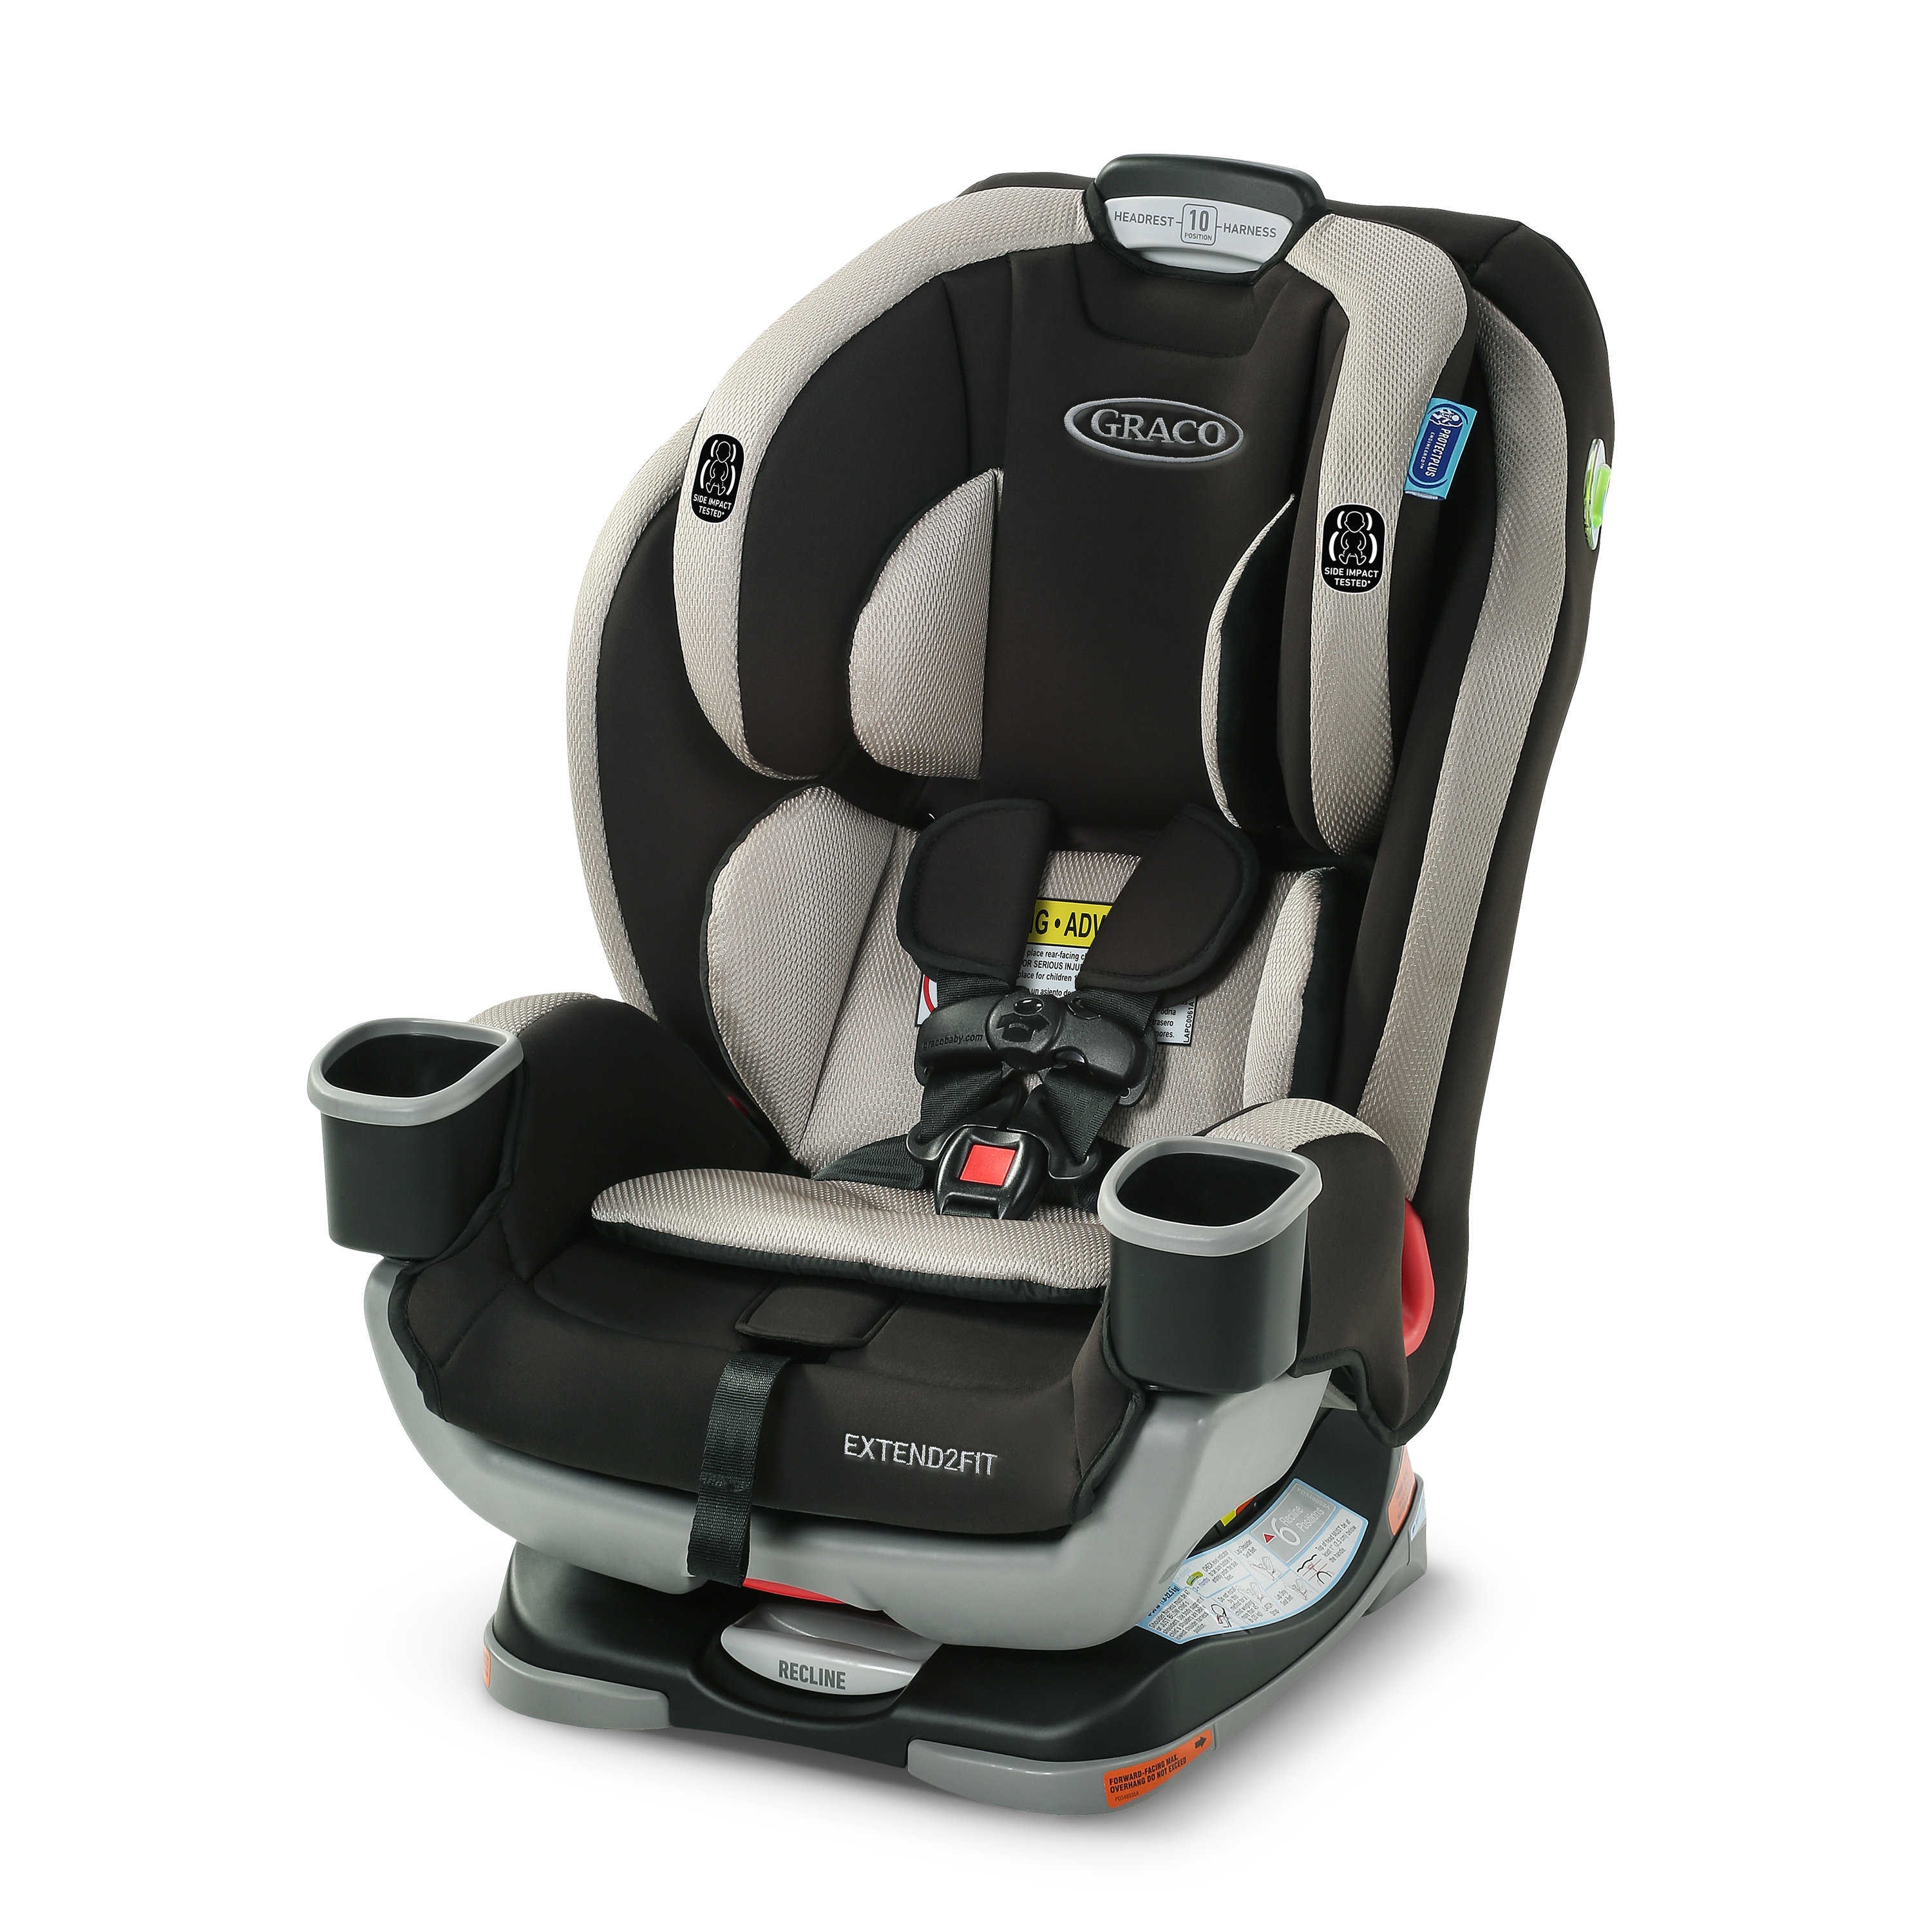 Graco Extend2Fit 3-in-1 Convertible Car Seat, Stocklyn - image 1 of 8